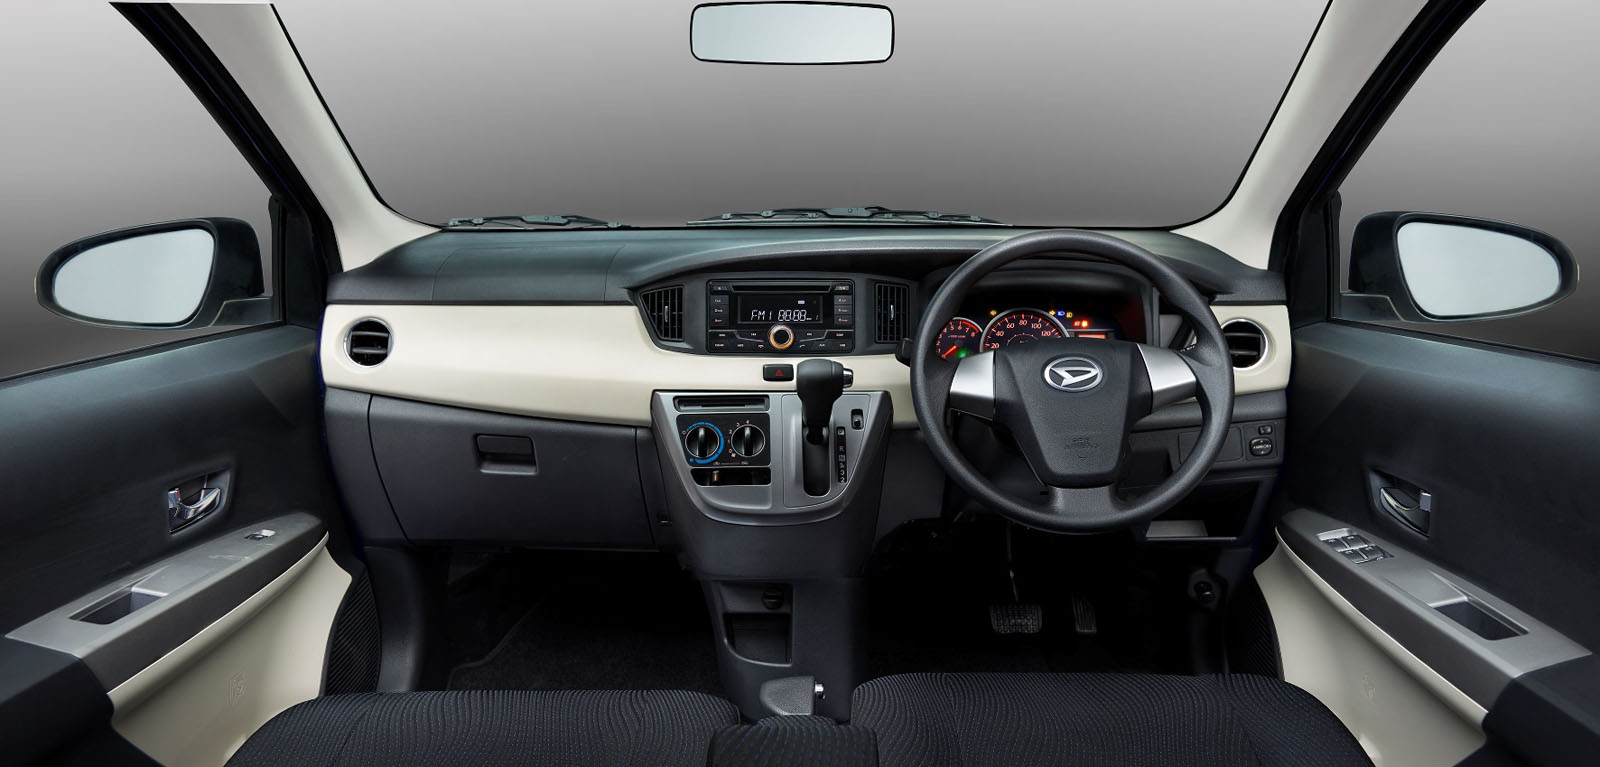 Daihatsu Rolls Out New Budget- And Family-Friendly Sigra 